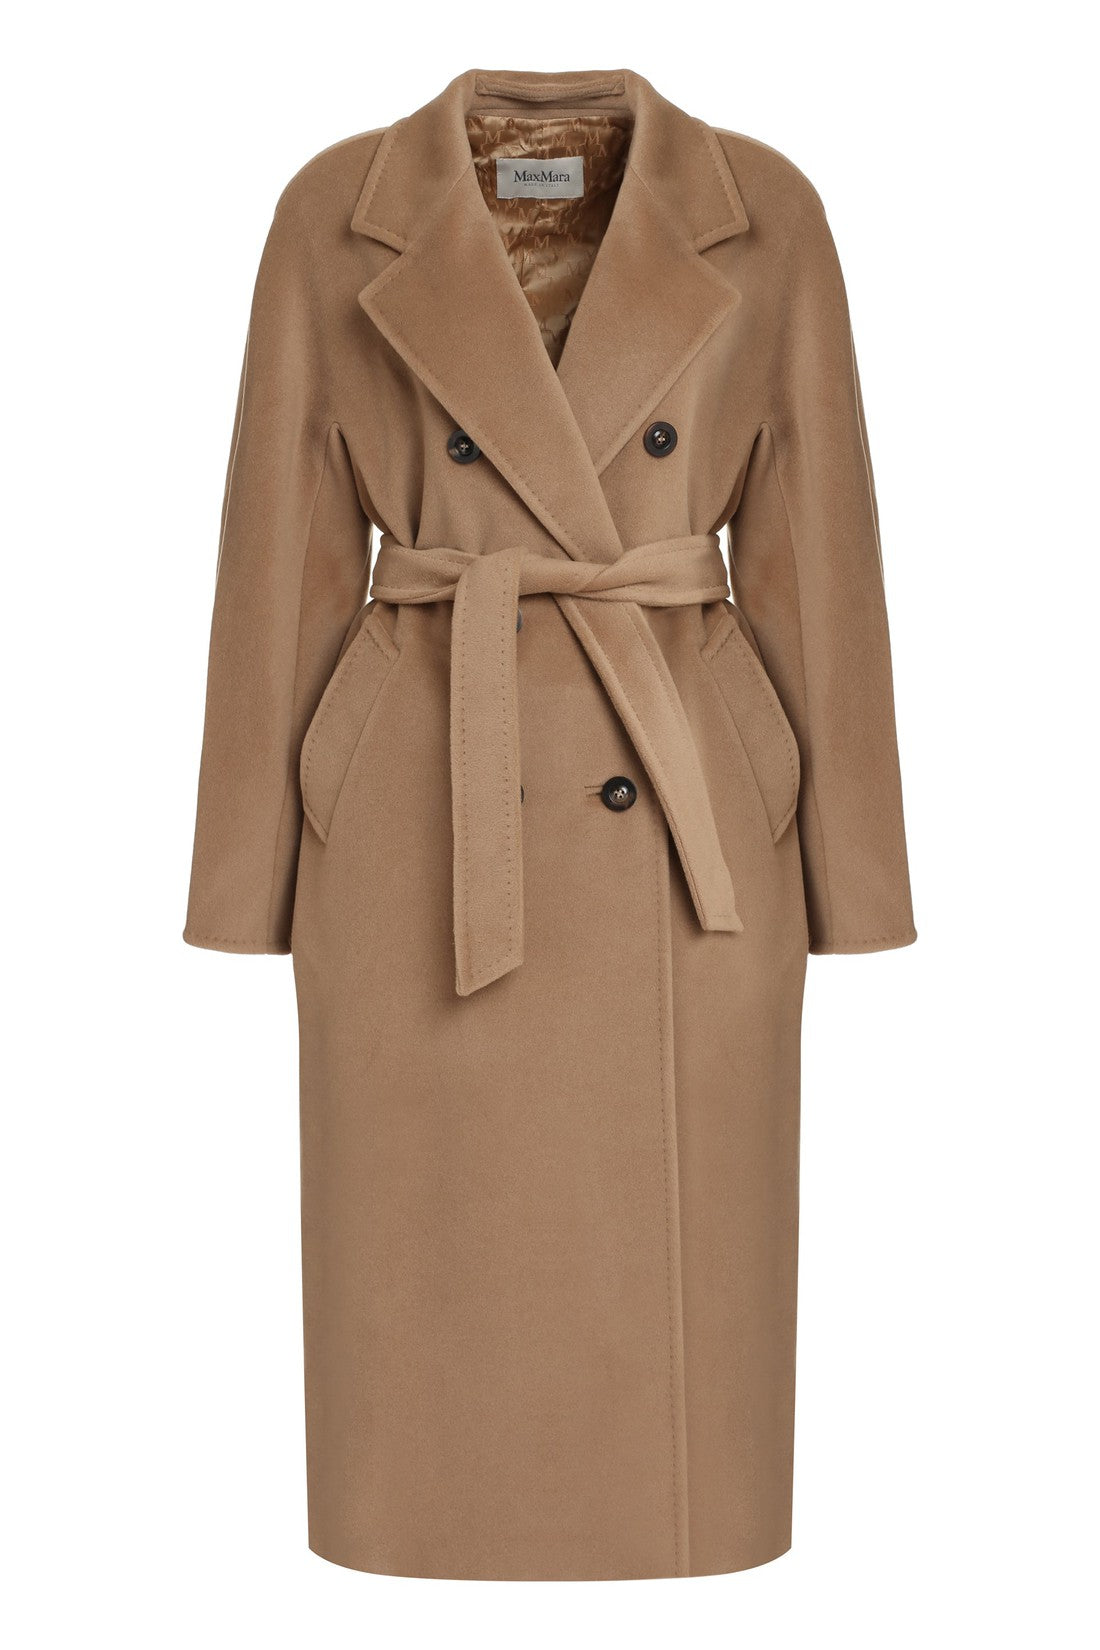 Max Mara-OUTLET-SALE-101801-Icon wool and cashmere coat-ARCHIVIST